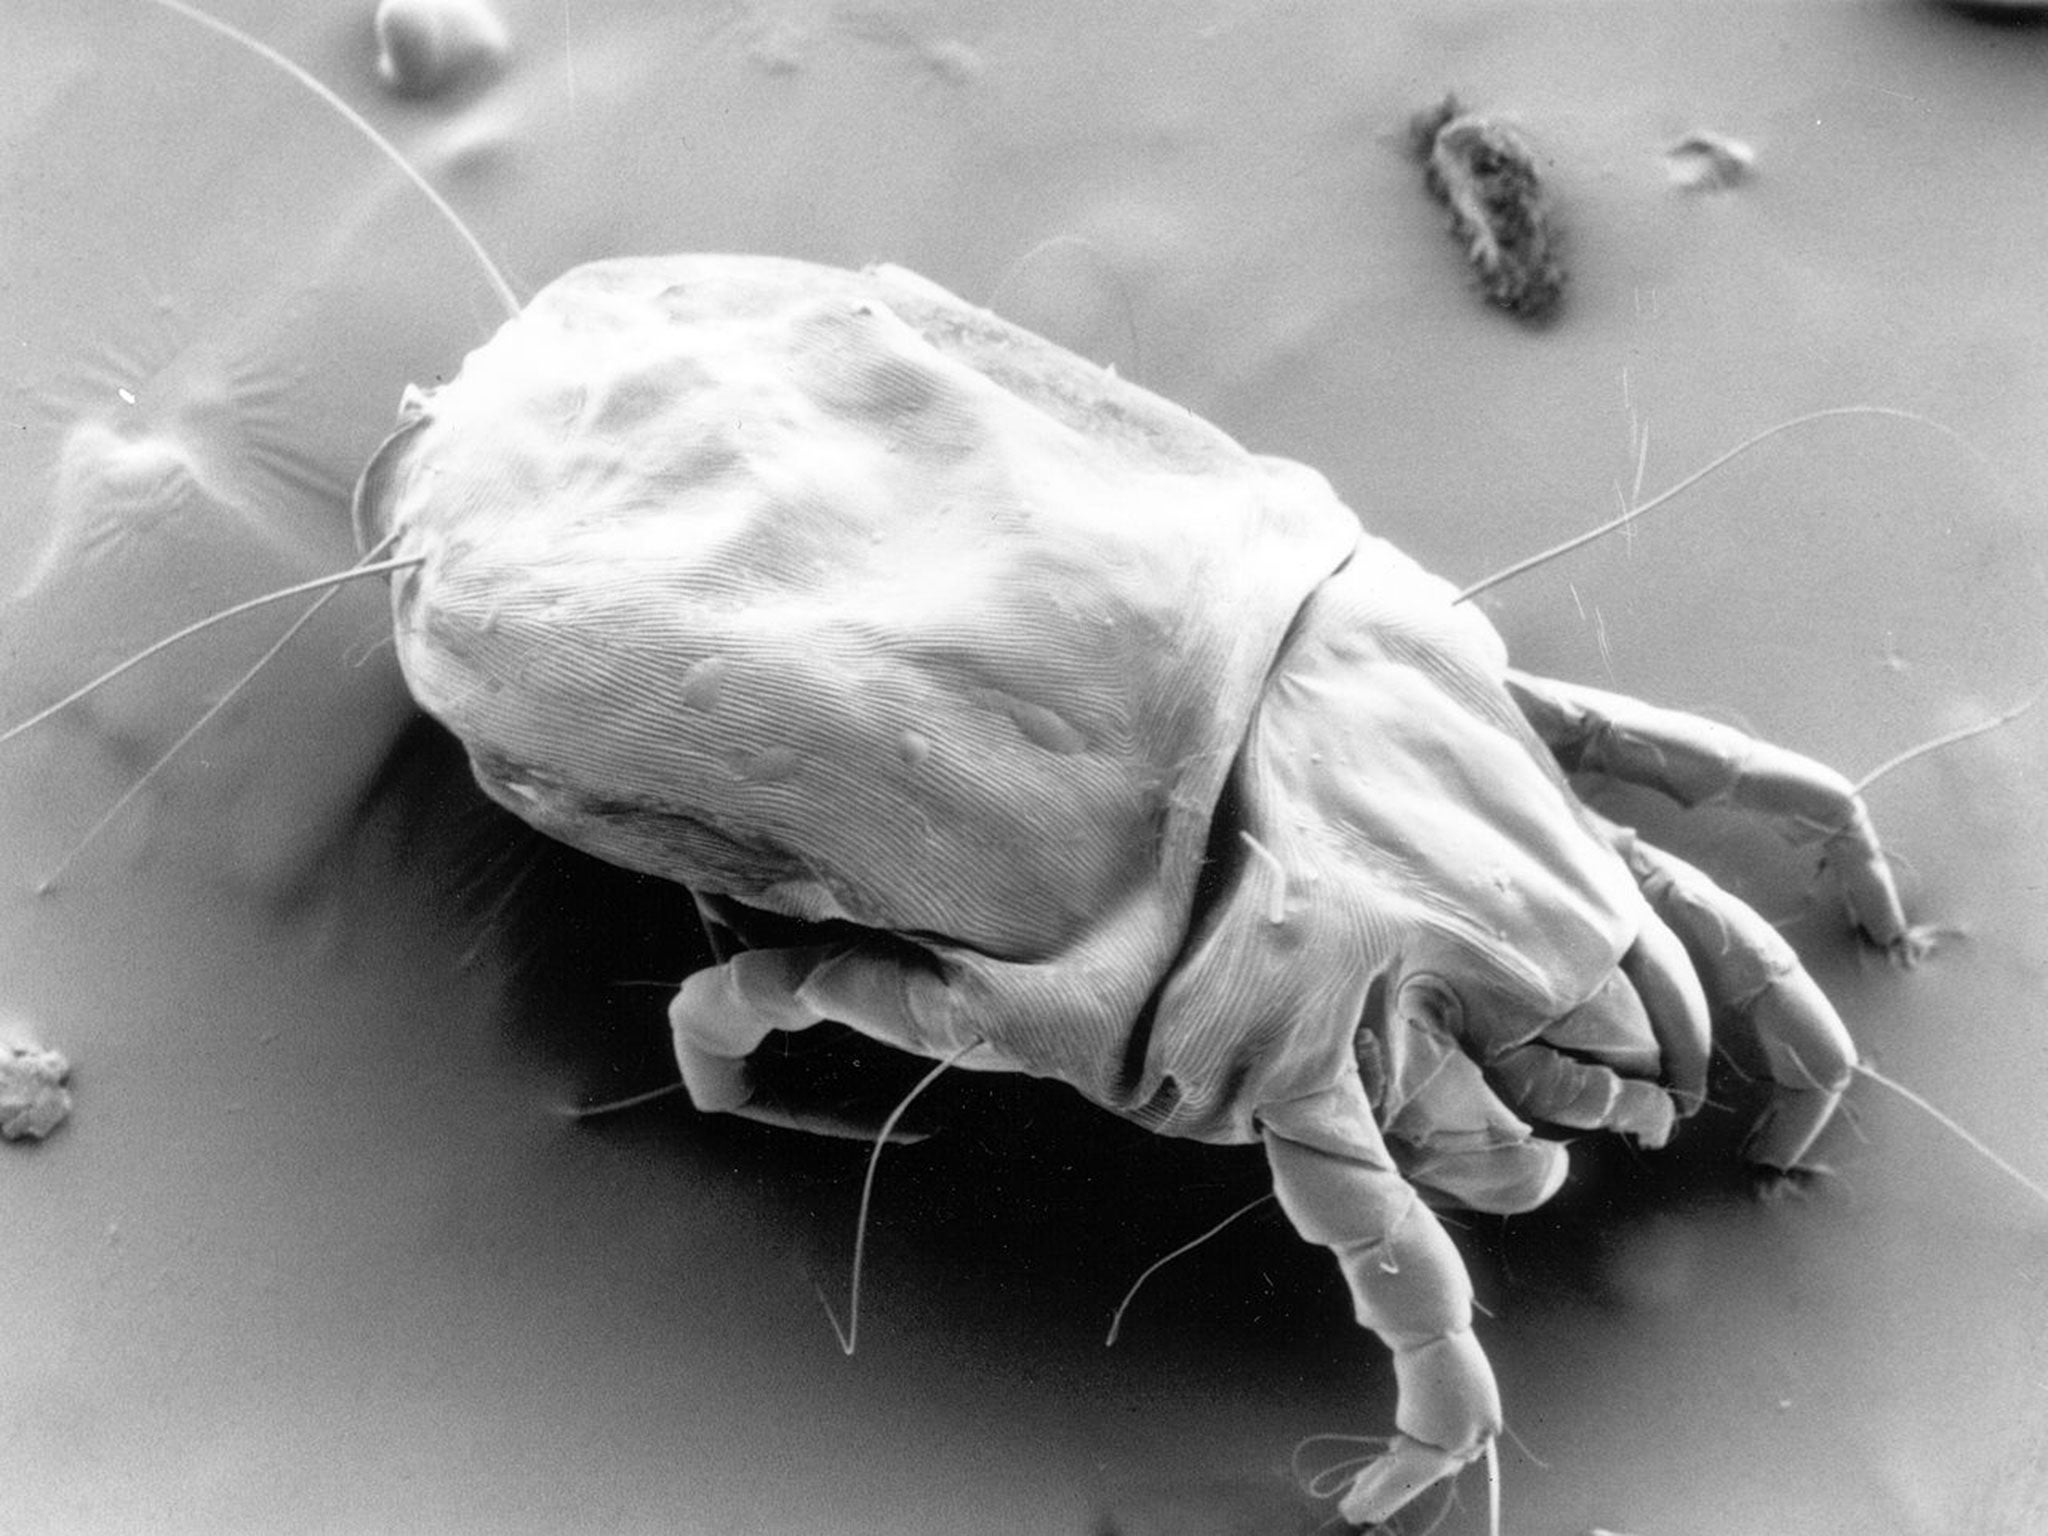 Millions of dust mites could be living in your bed